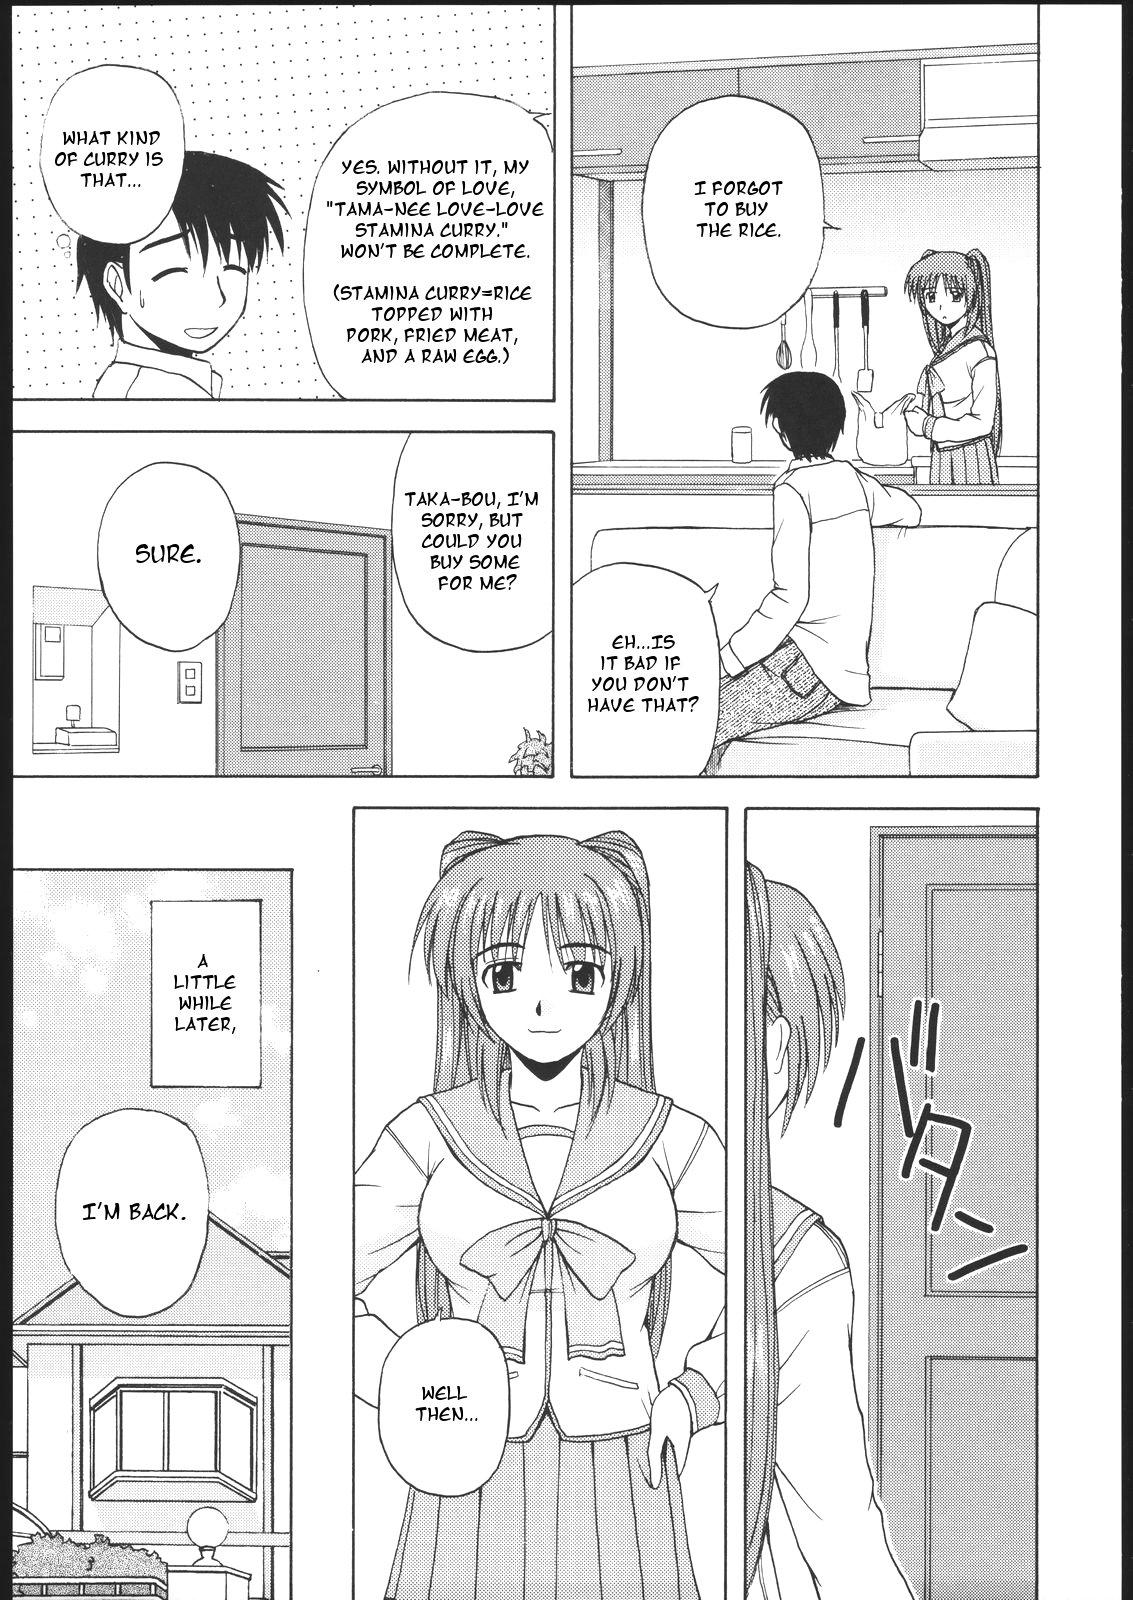 Asians Tama-nee to Issho 2 - Toheart2 3way - Page 9